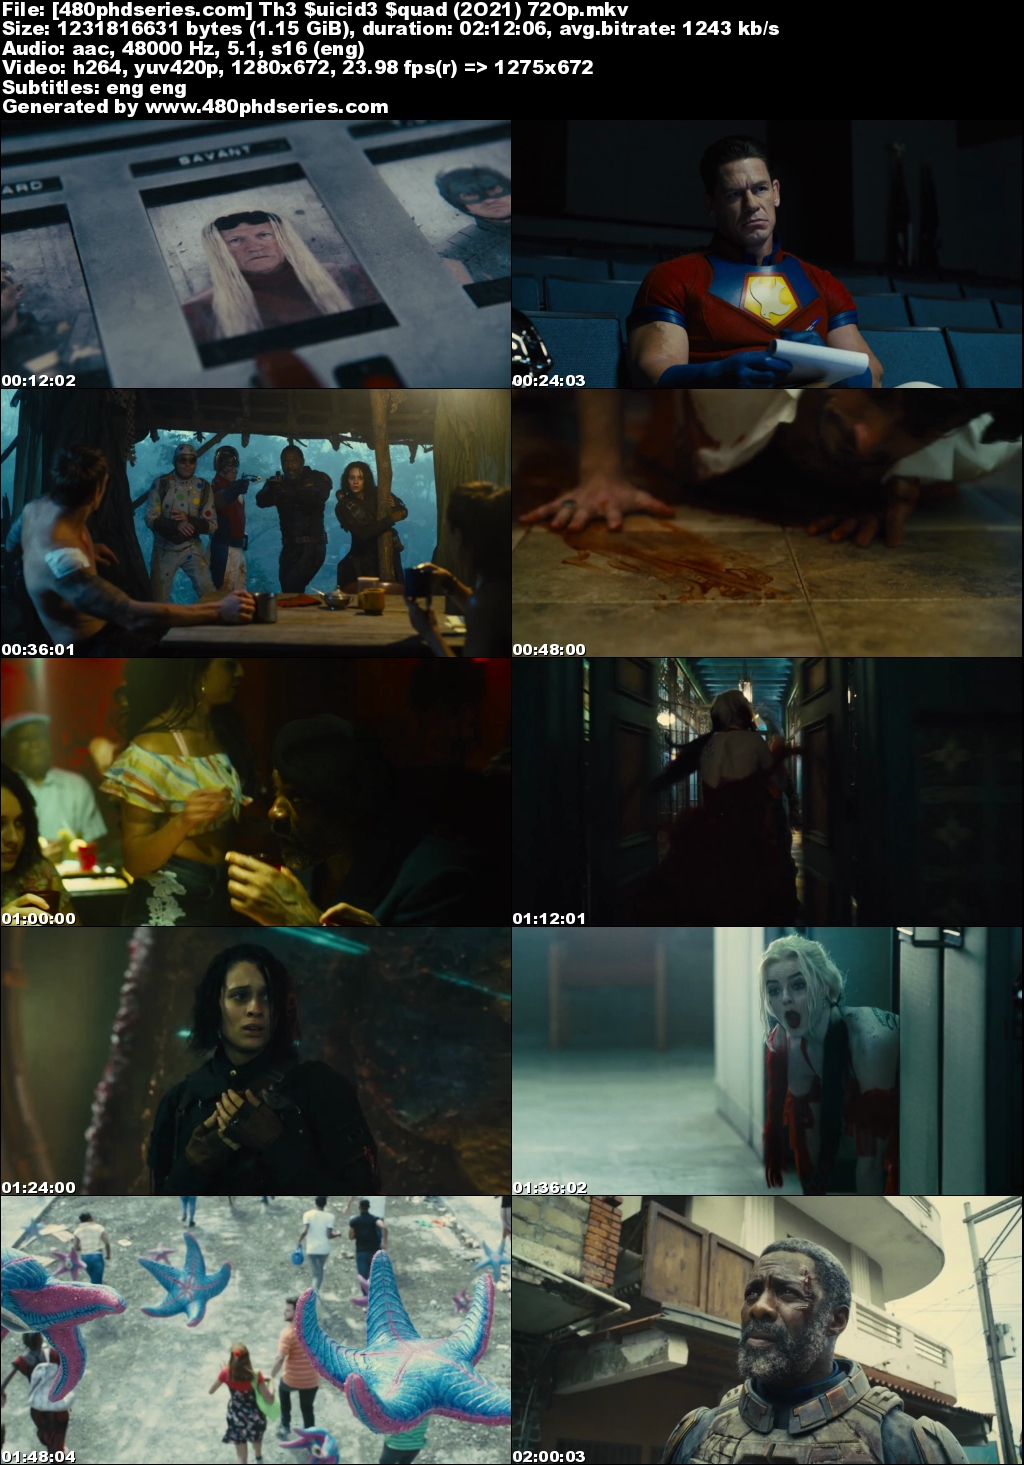 Watch Online Free The Suicide Squad 2 (2021) Full English Movie Download 720p 480p WebRip